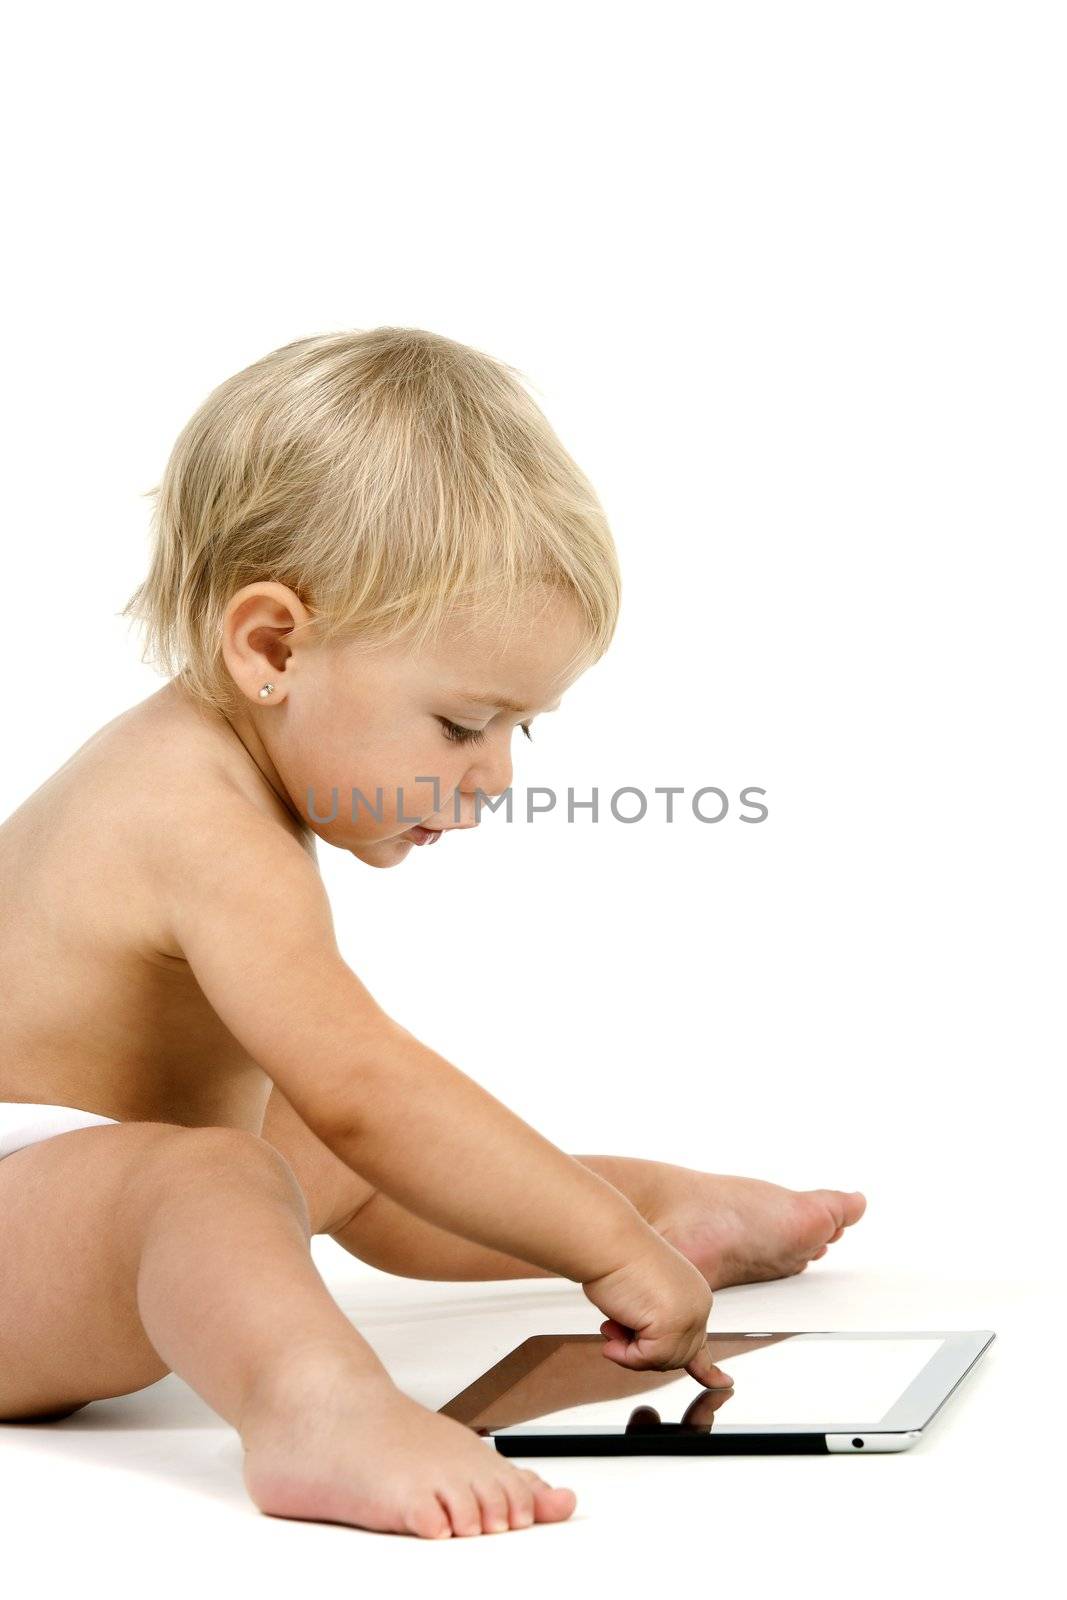 Baby girl playing with tablet. Isolated on white background.